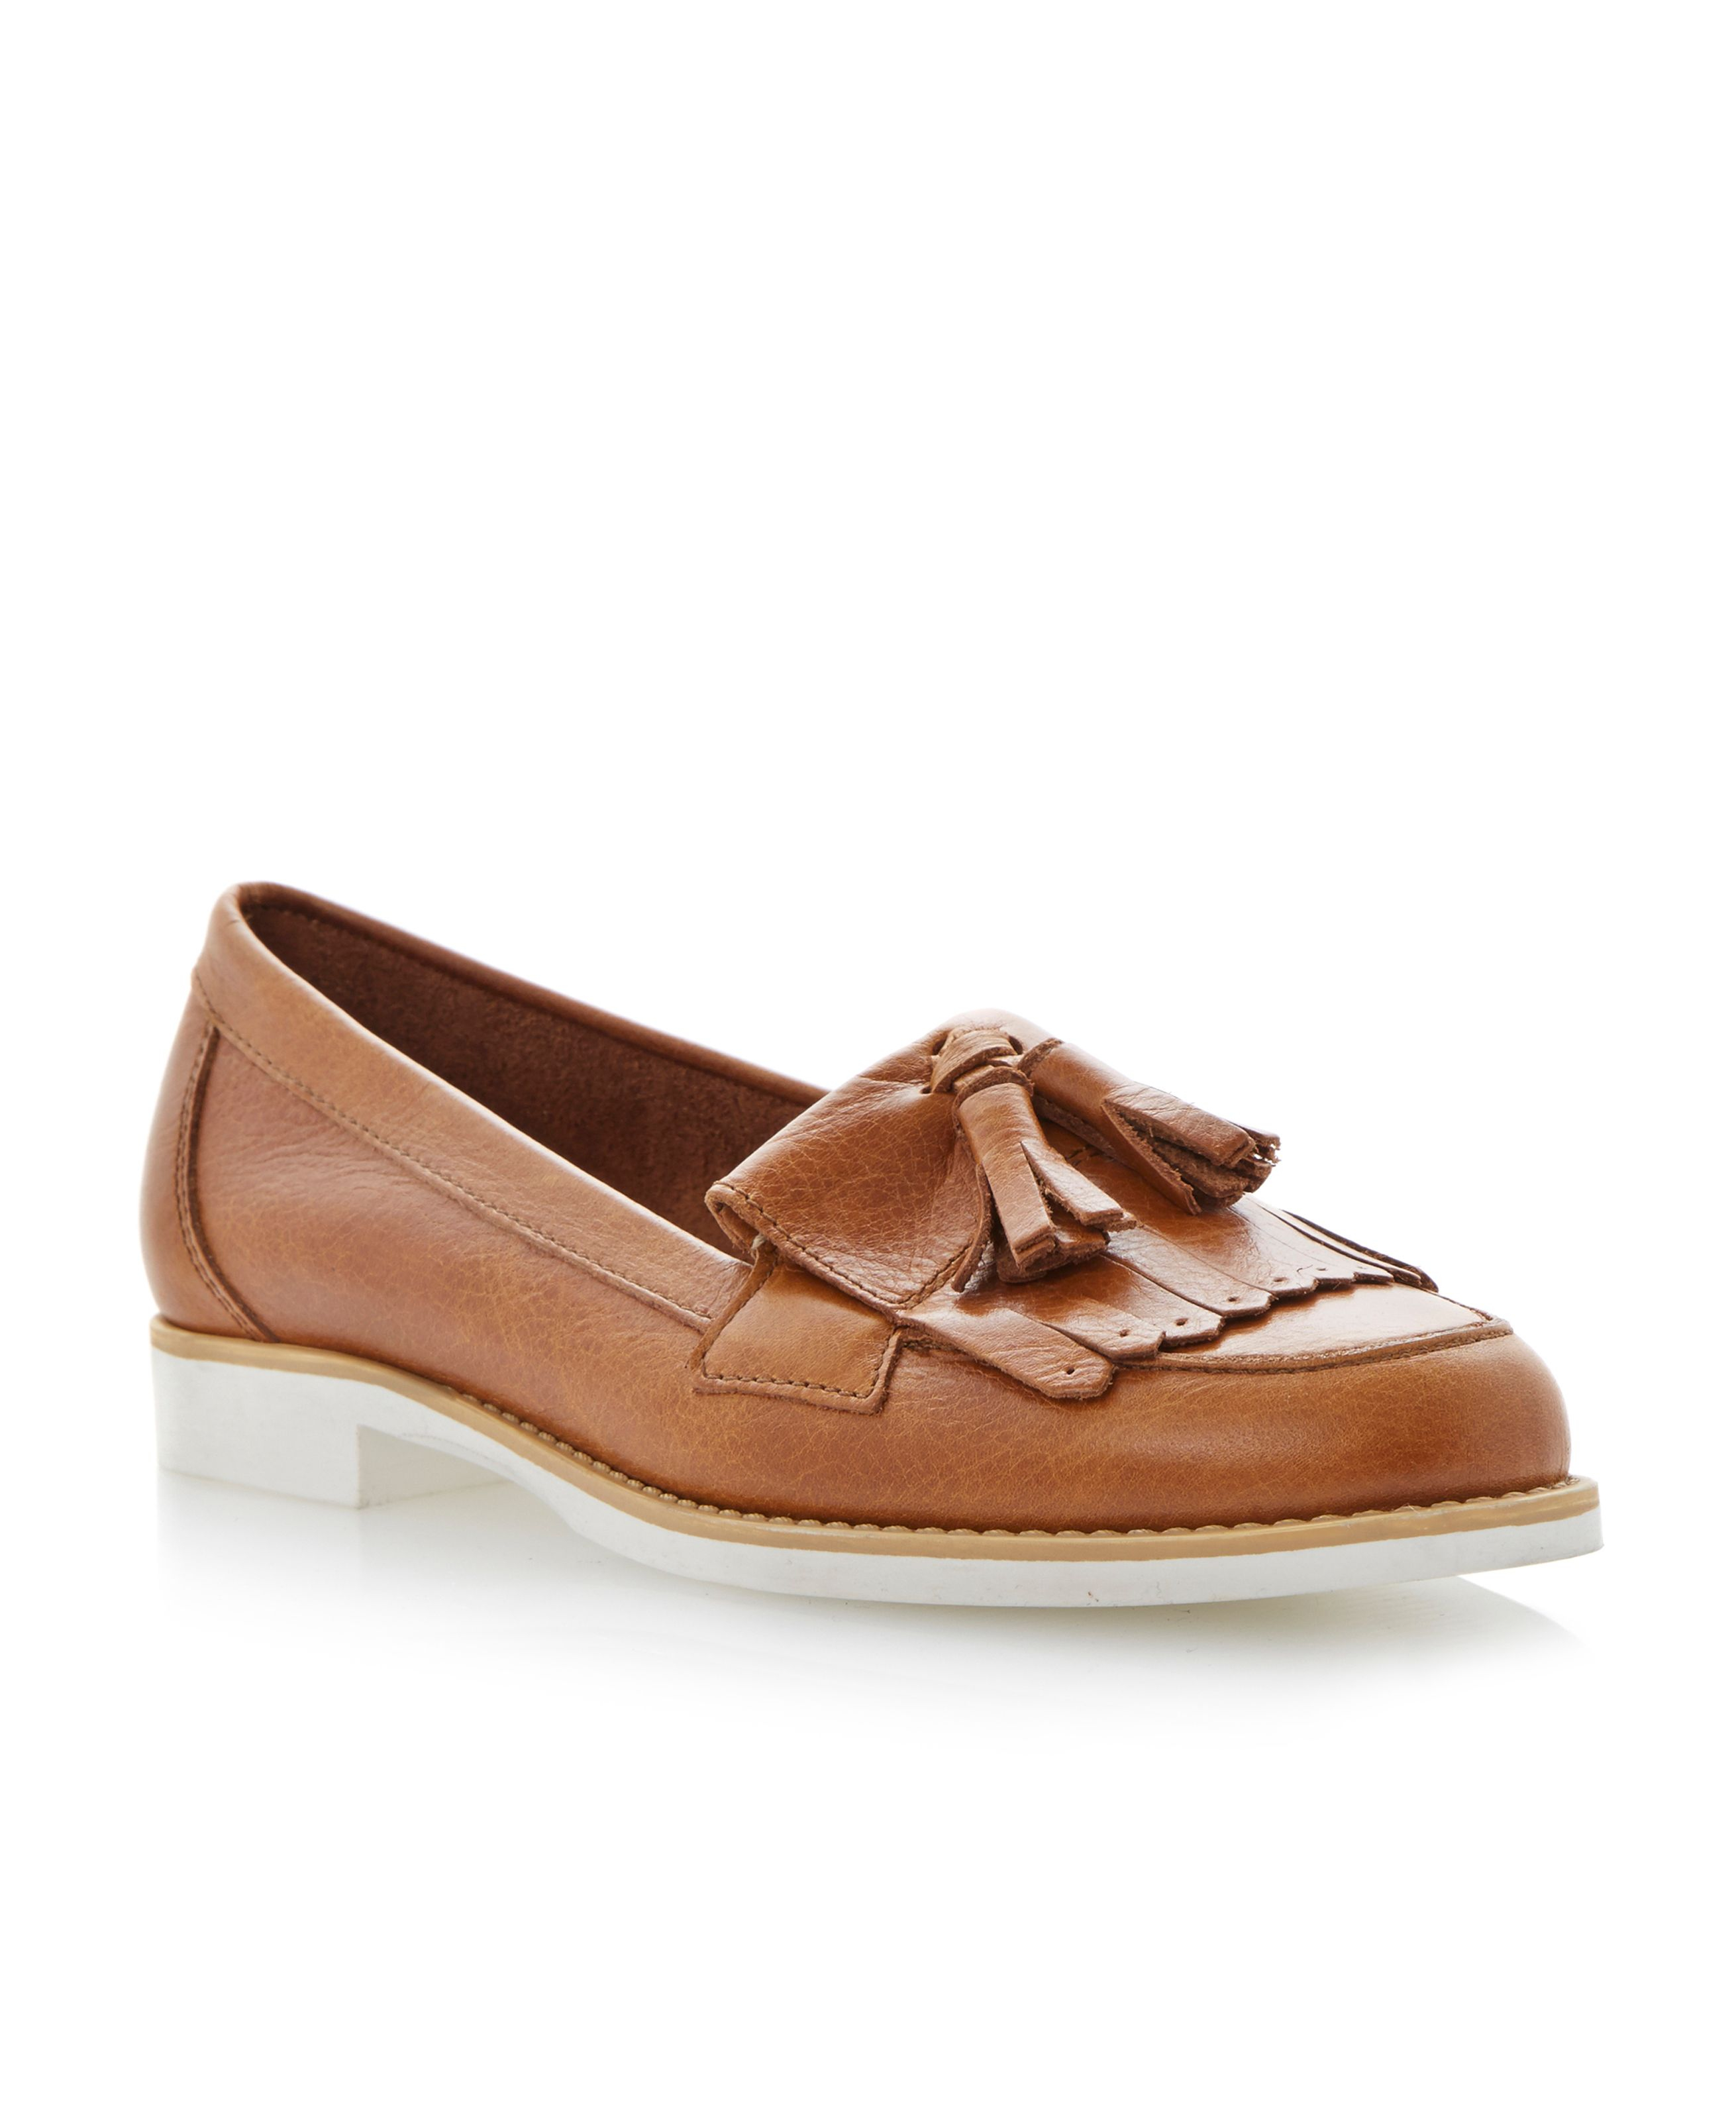 Dune Lennon Leather Almond Toe Loafer Shoes in Brown (Tan) | Lyst